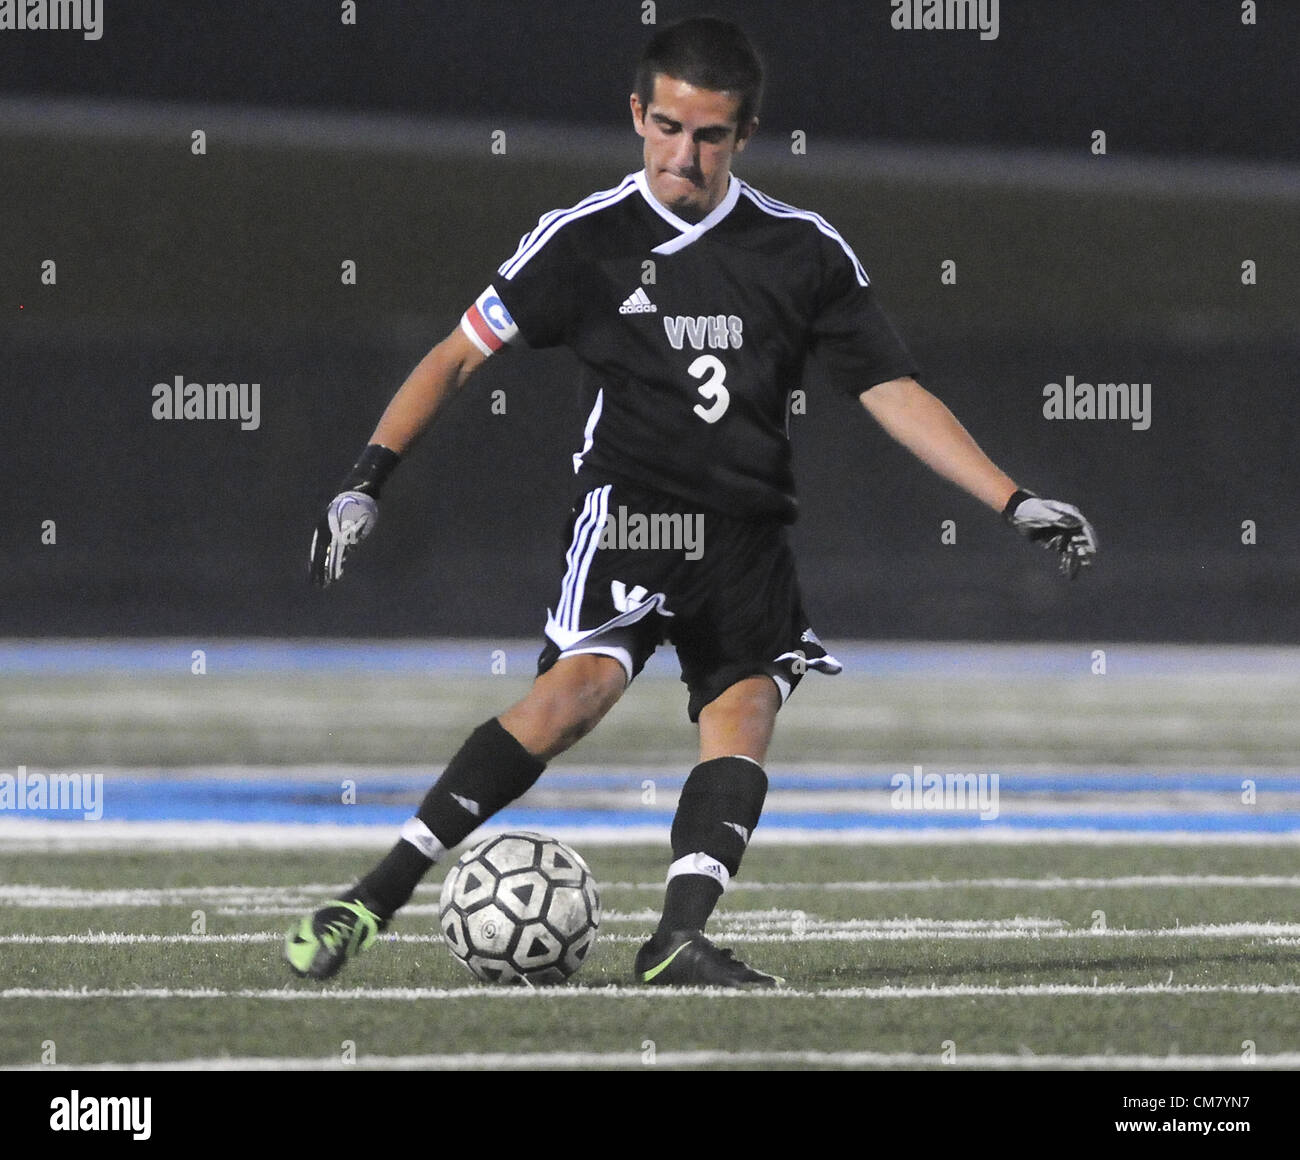 Oct. 24, 2012 - Albuquerque, NM, U.S. - Volcano Vista and Cleveland battle it out in boys soccer Wed. night. Wednesday, Oct. 24, 2012. (Credit Image: © Jim Thompson/Albuquerque Journal/ZUMAPRESS.com) Stock Photo